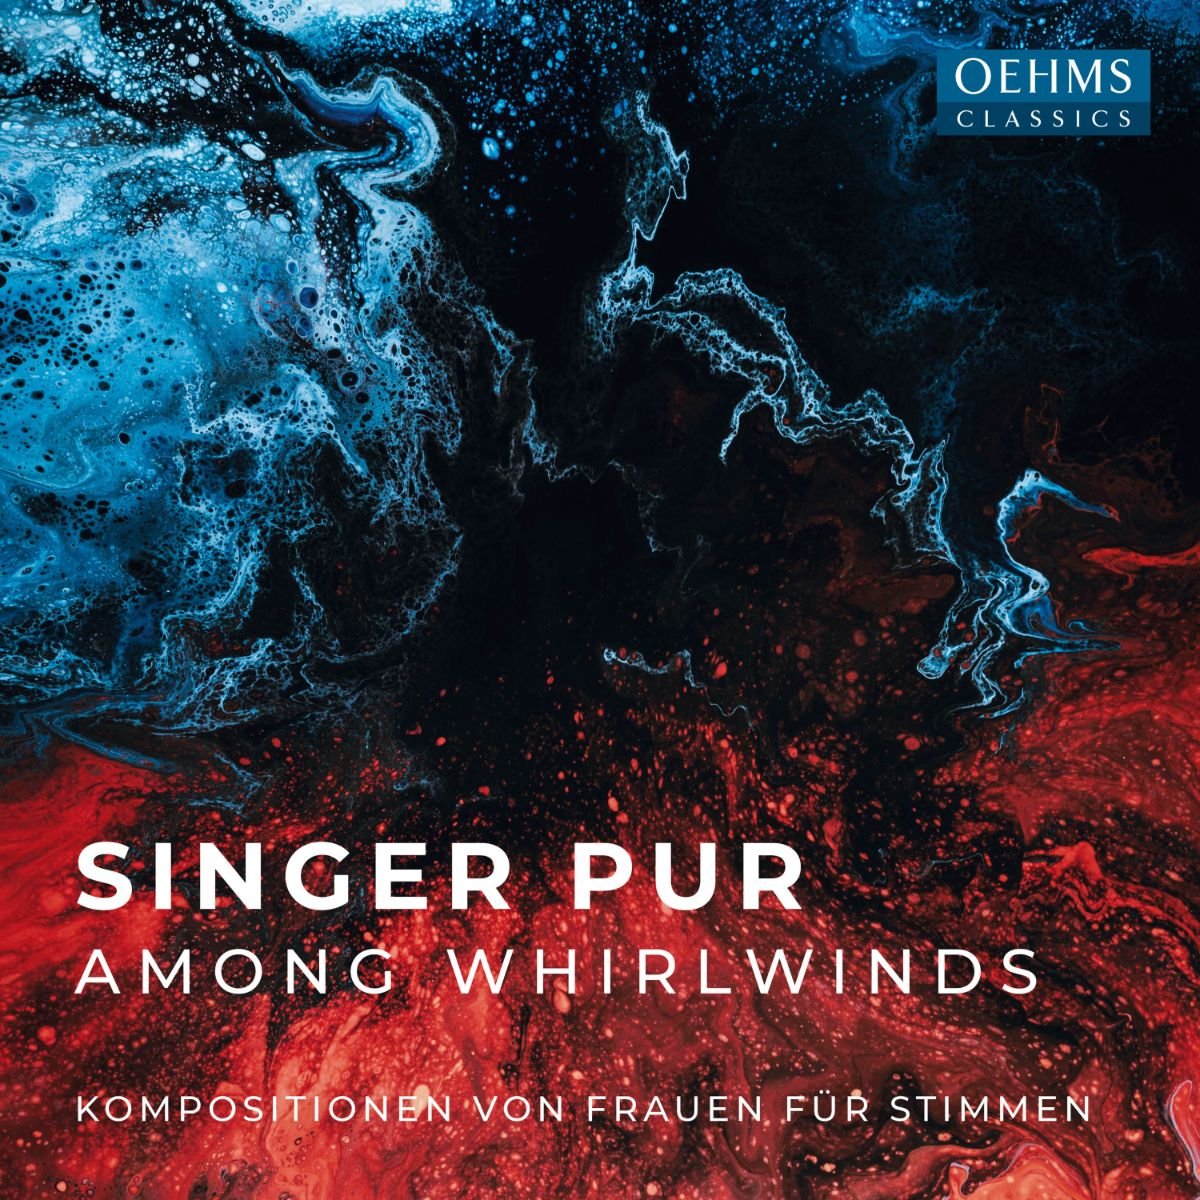 Singer Pur Among Whirlwinds